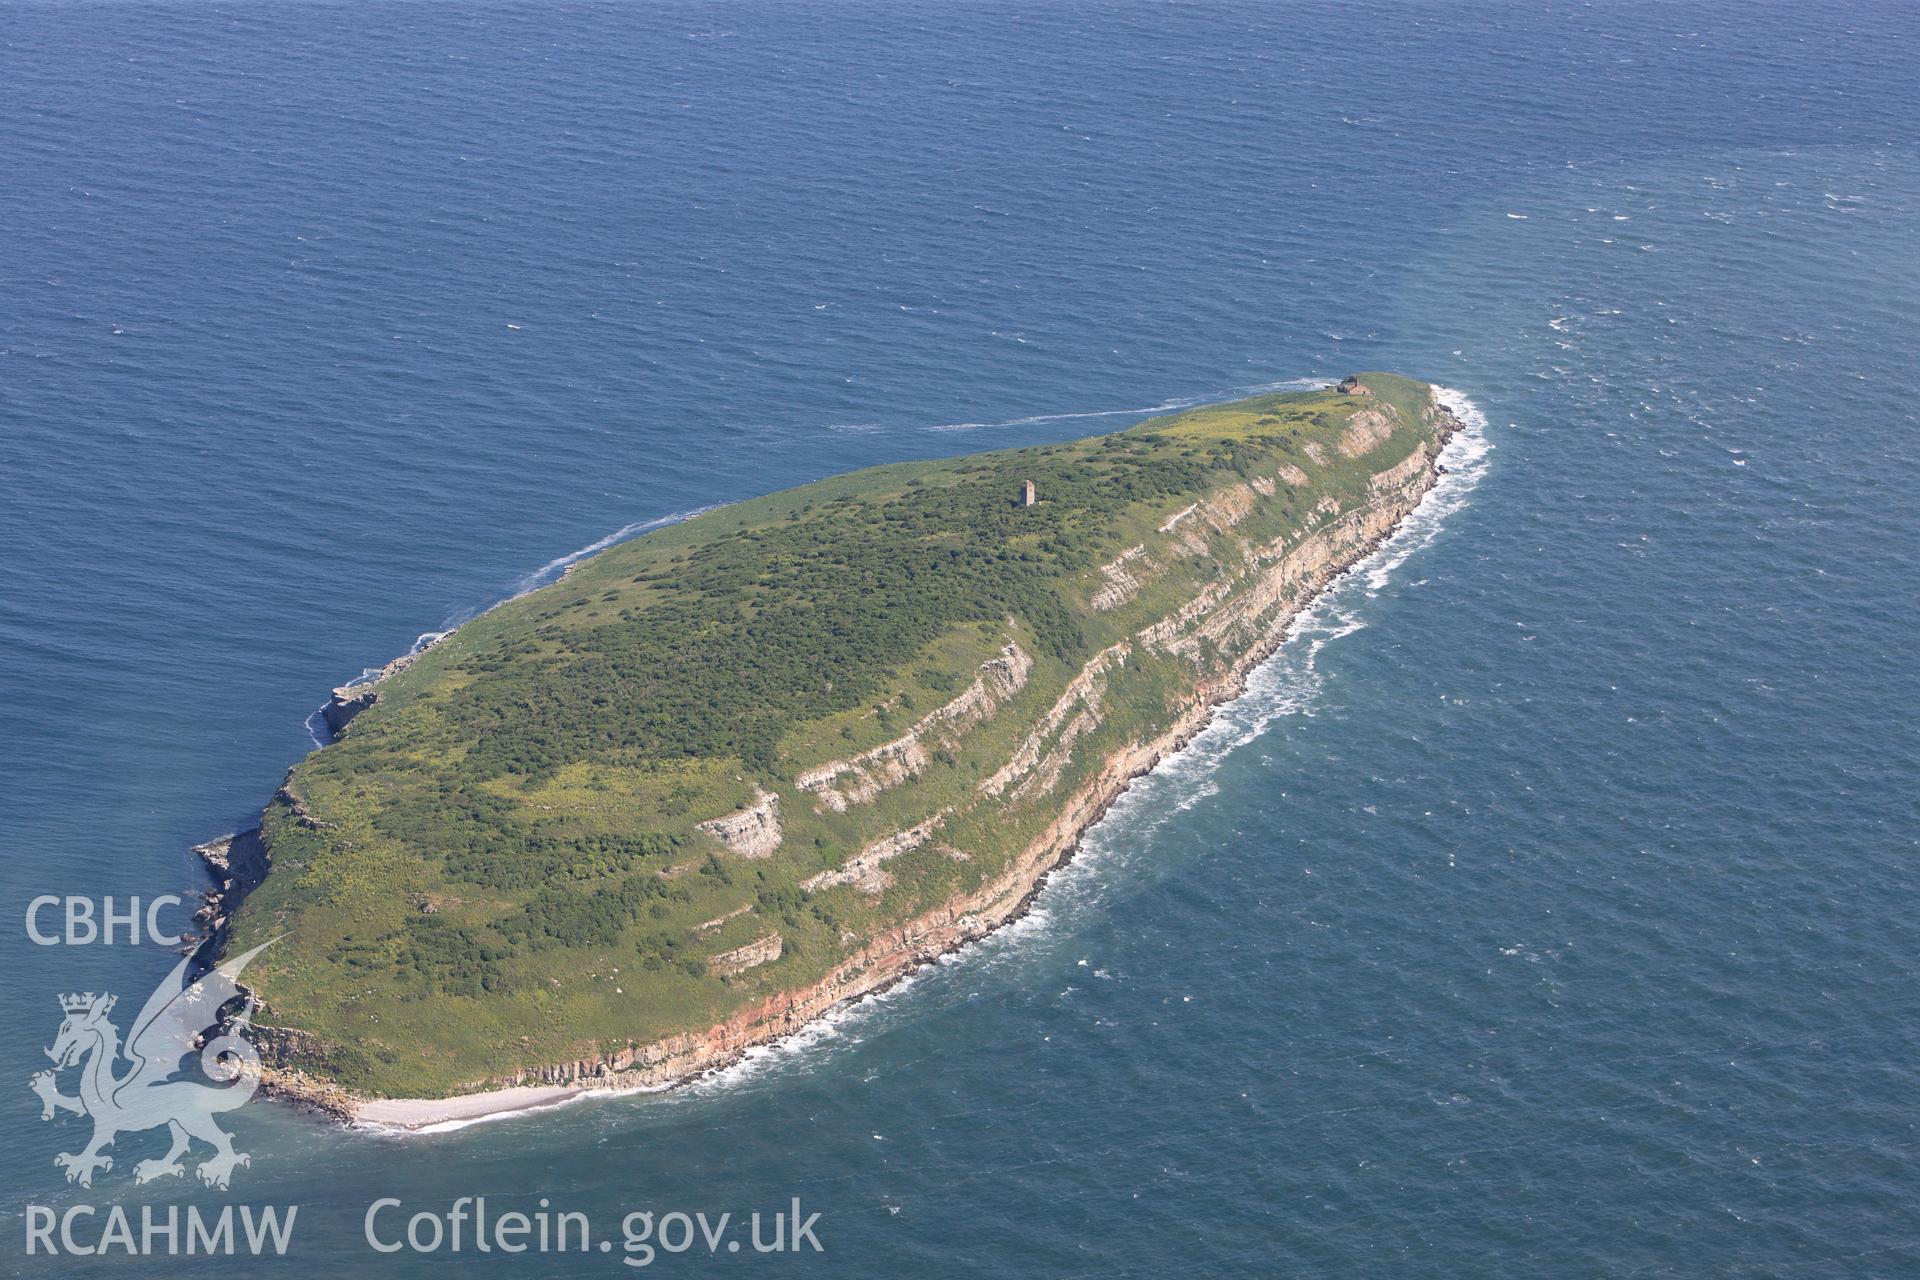 RCAHMW colour oblique photograph of Puffin Island, with cell of Penmon Priory. Taken by Toby Driver on 03/05/2011.